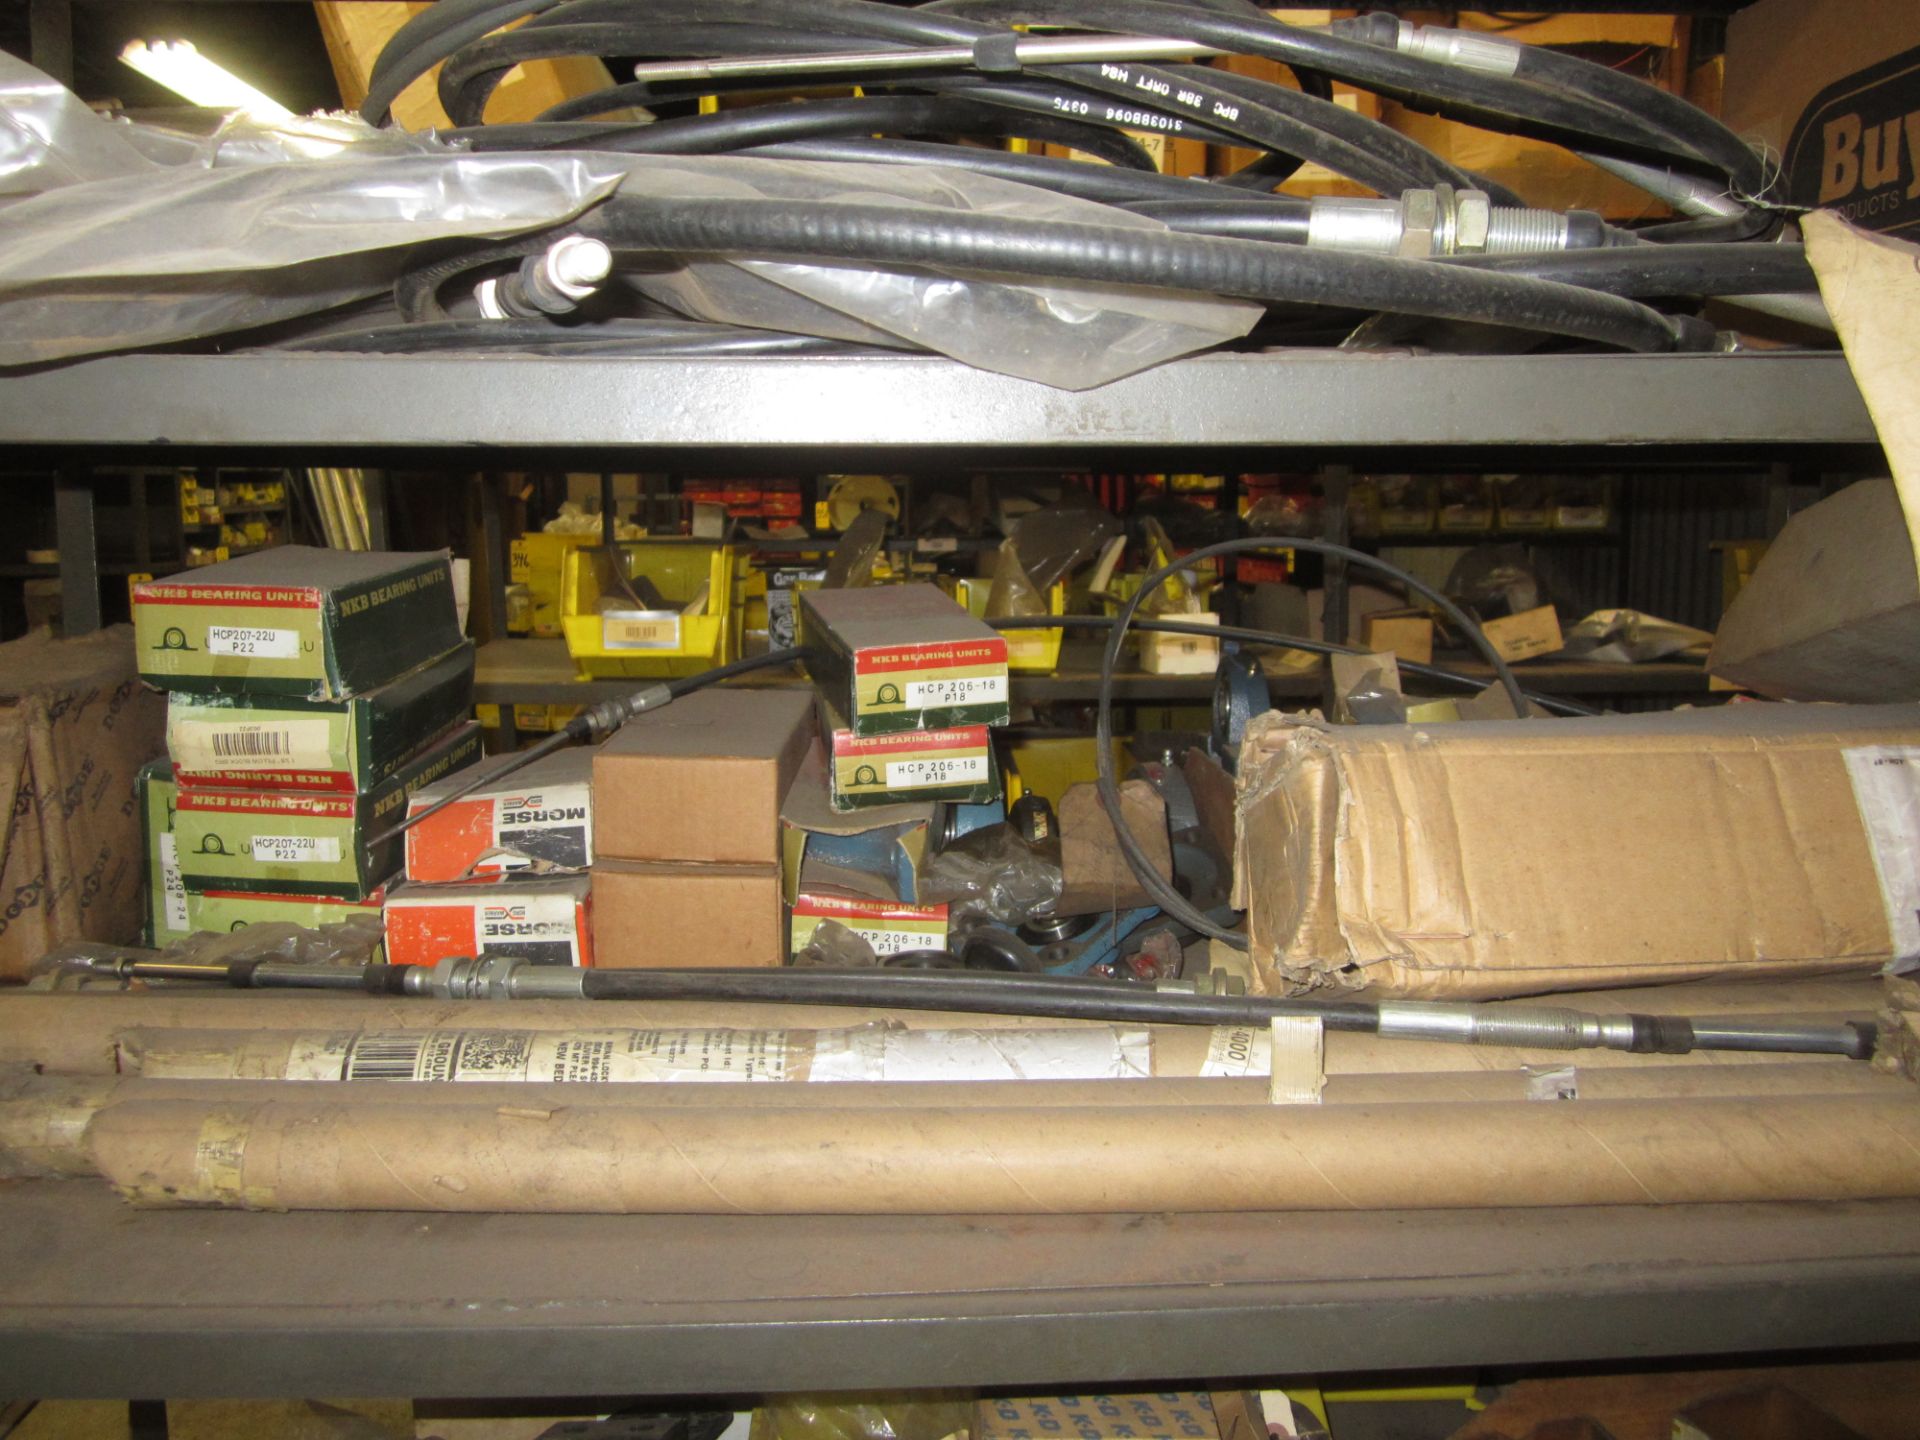 Welded Metal Shelving Unit and Contents - Image 3 of 10